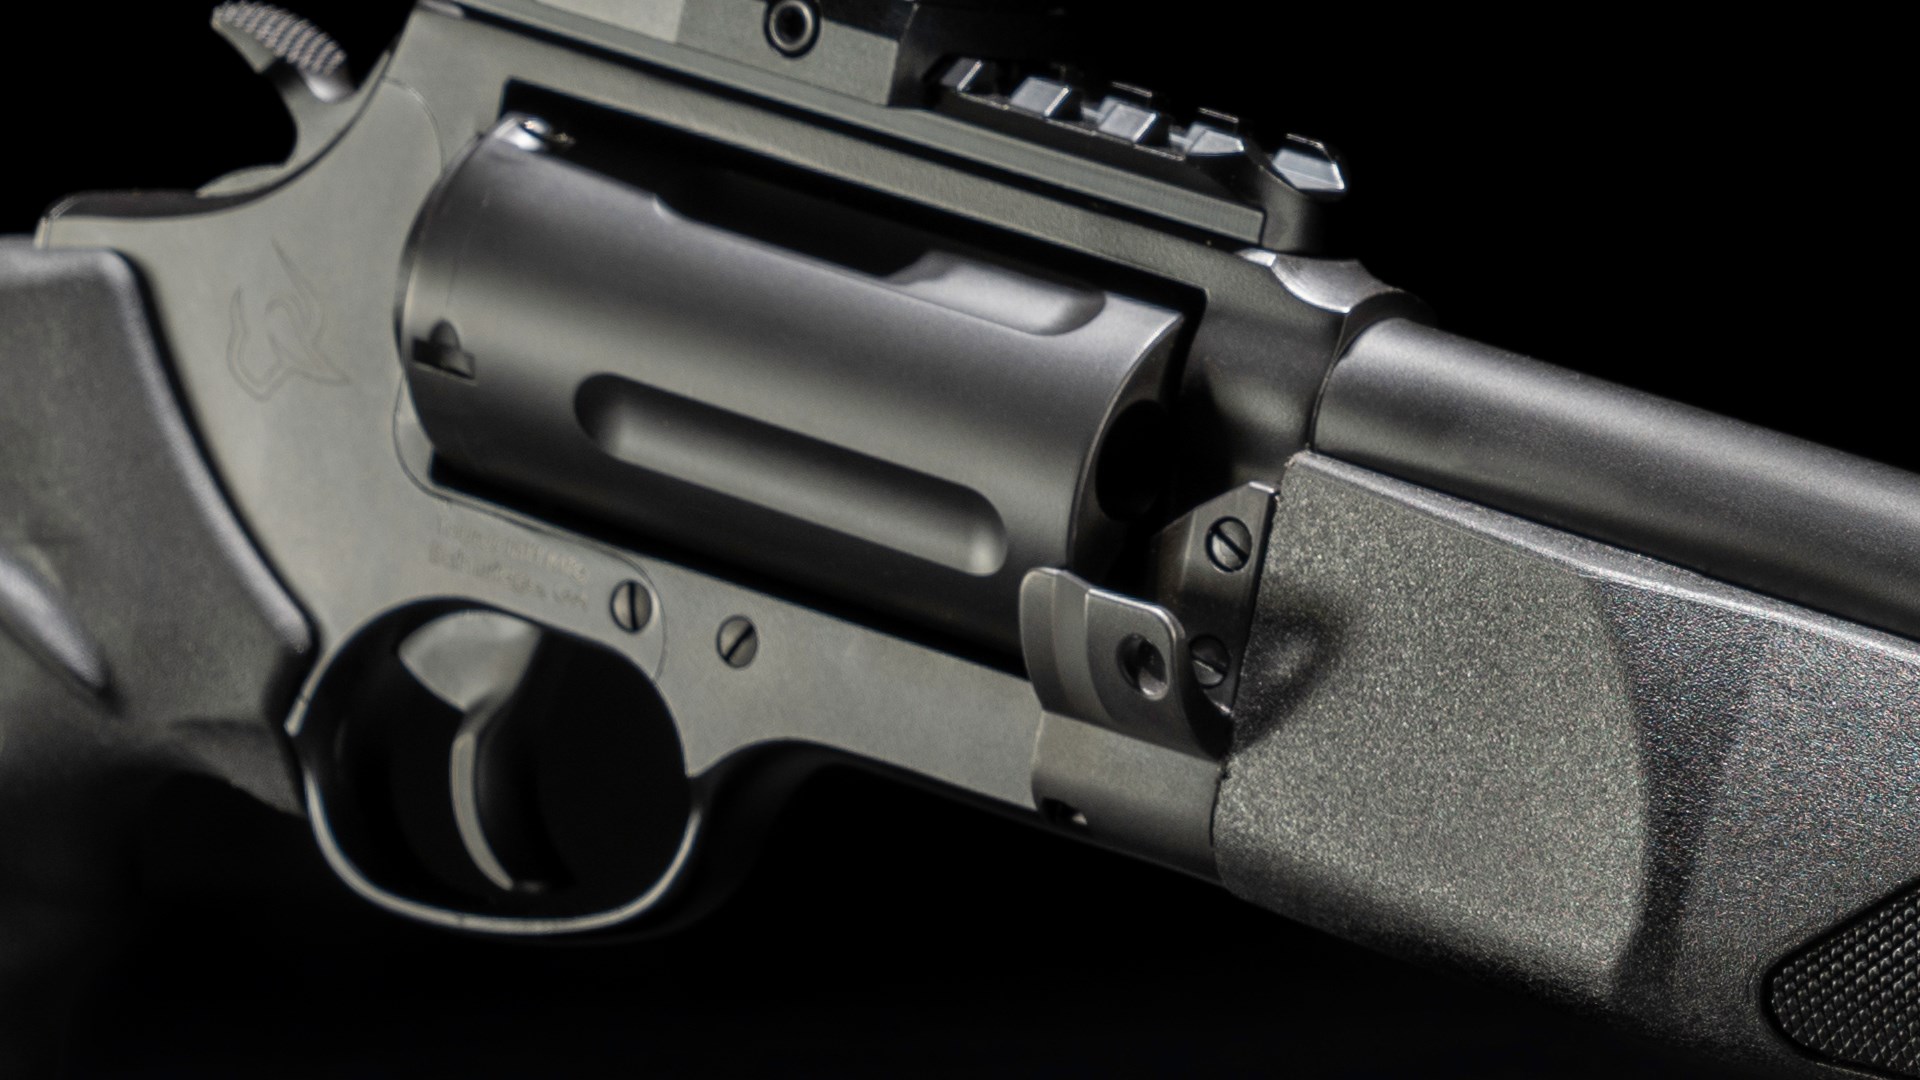 Right-side look at the cylinder and blast shield on the Taurus Judge Home Defender.